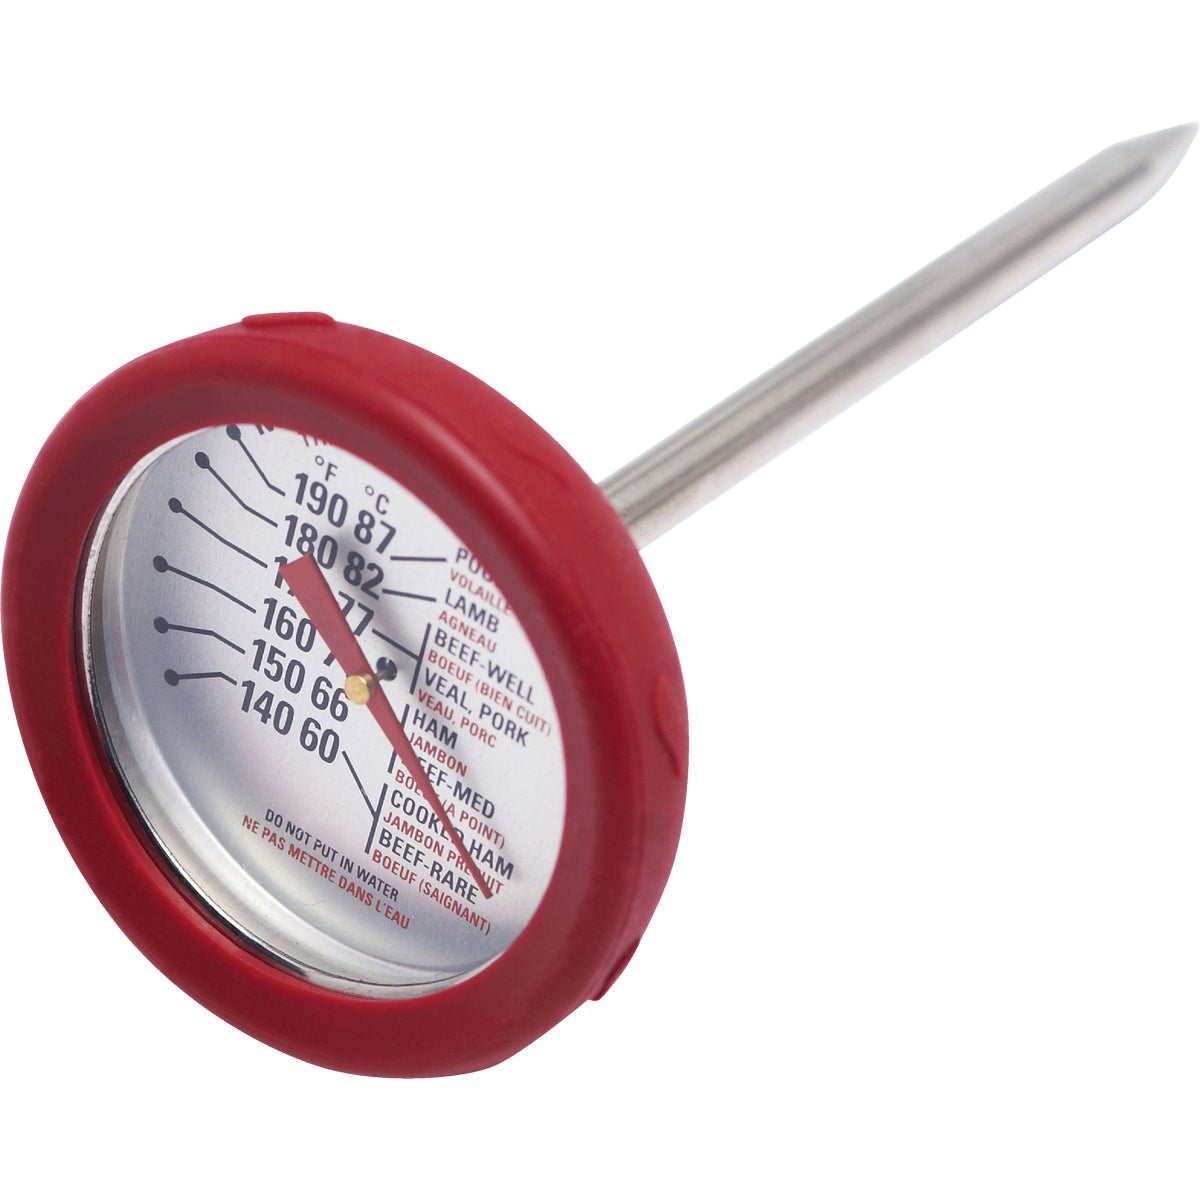 Item 800097, Stainless steel meat thermometer with silicone bezel for easy removal from 